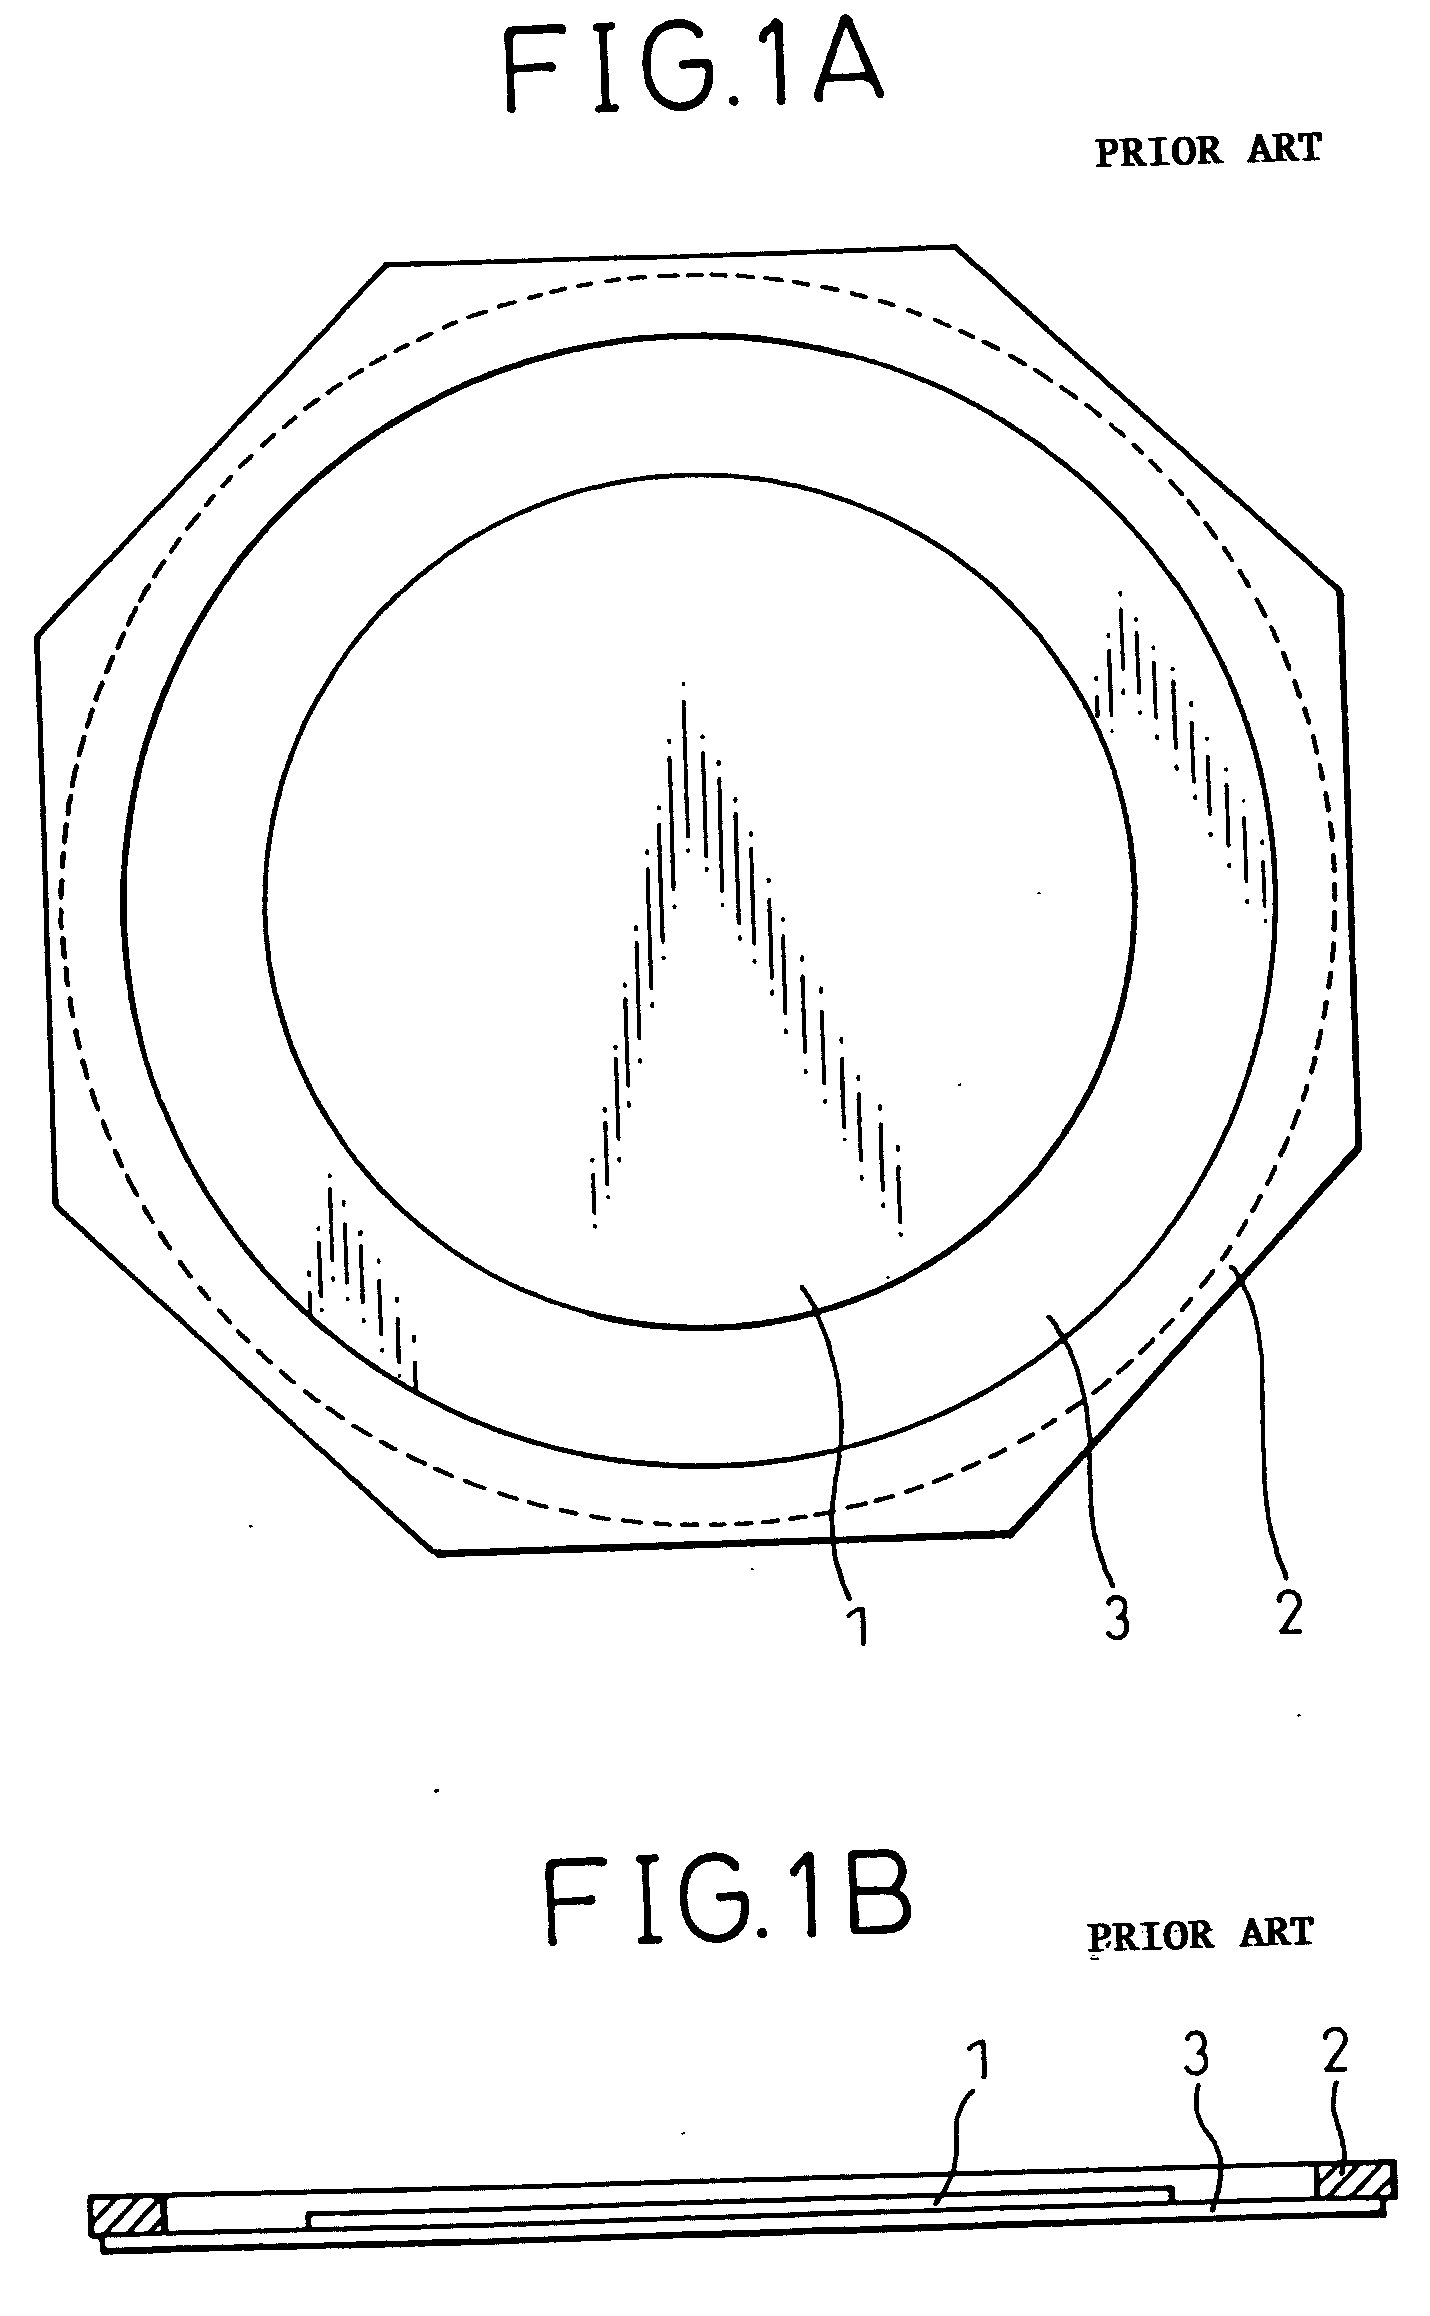 Dicing tape applying apparatus and back-grinding/dicing tape applying system